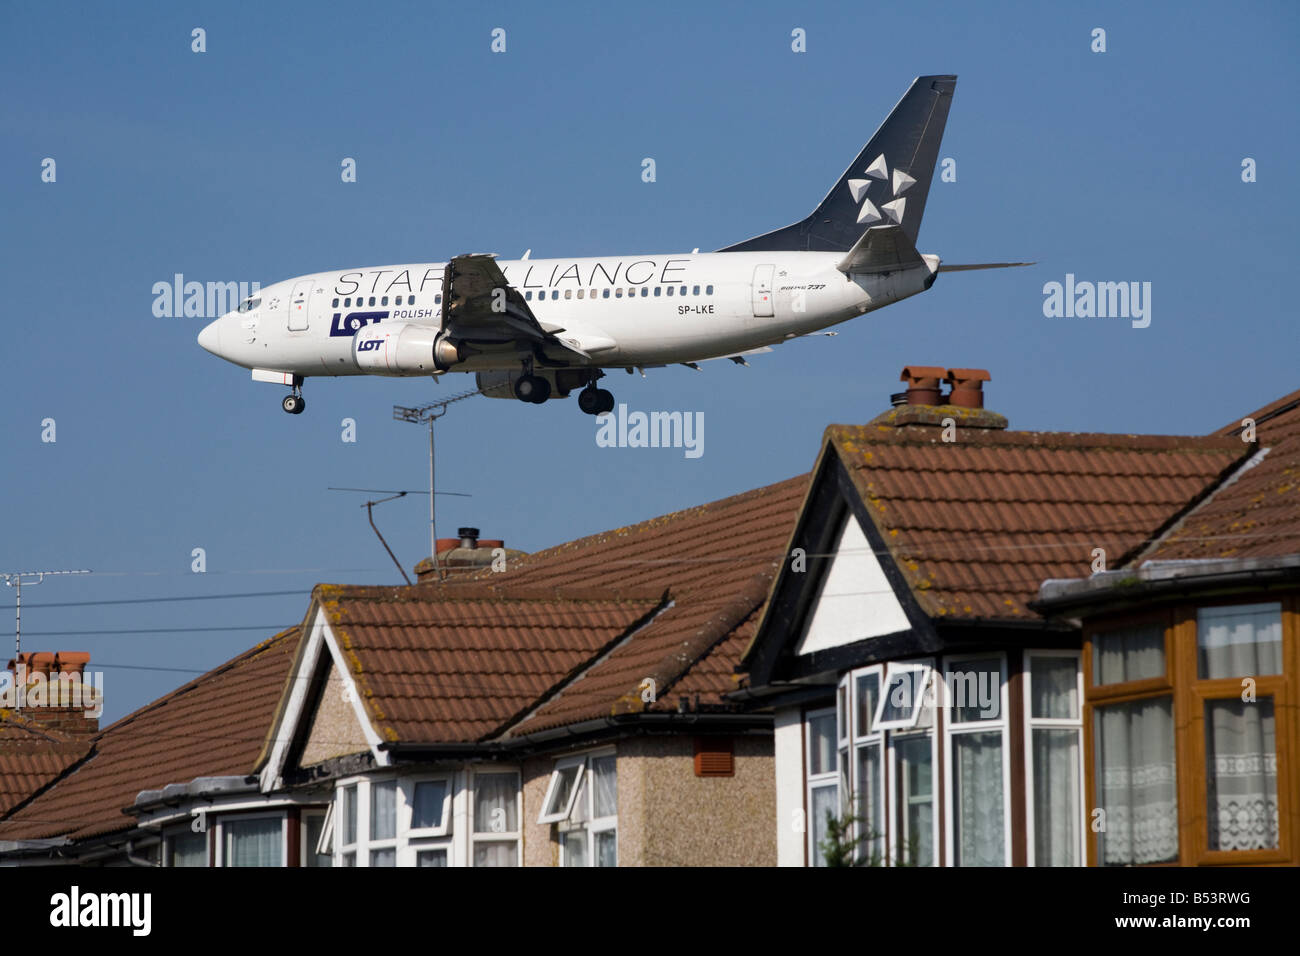 LOT Polish Airlines Star Alliance Boeing 737 55D registration number SP-LKE  approaching Heathrow airport, London. UK (41 Stock Photo - Alamy